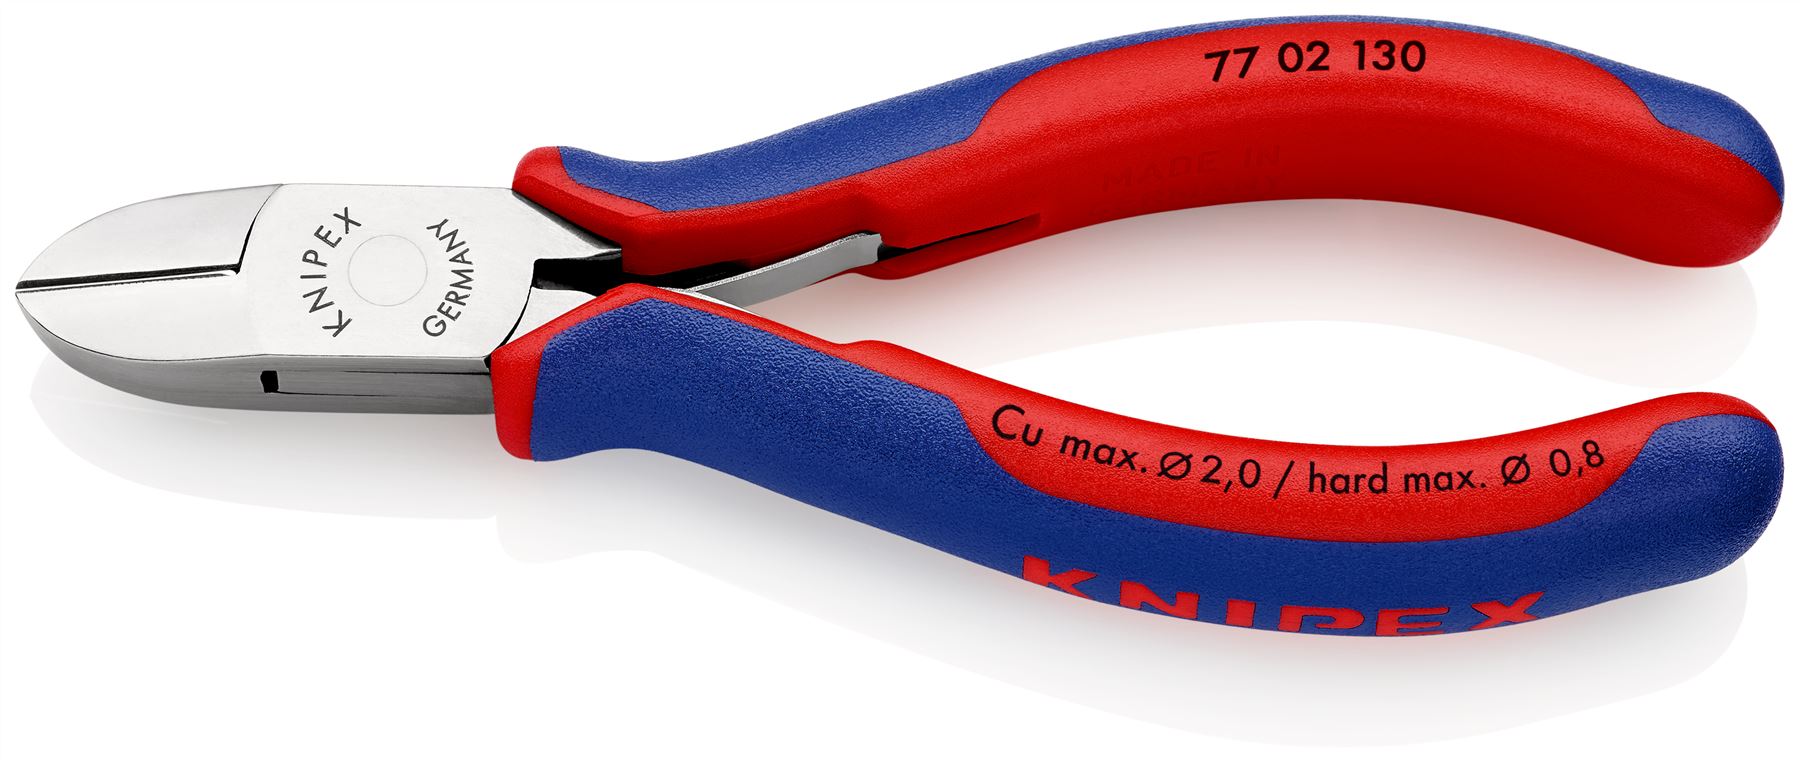 KNIPEX Electronics Diagonal Cutter Pliers Round Head Small Bevel 130mm Multi Component Grips 77 02 130 SB